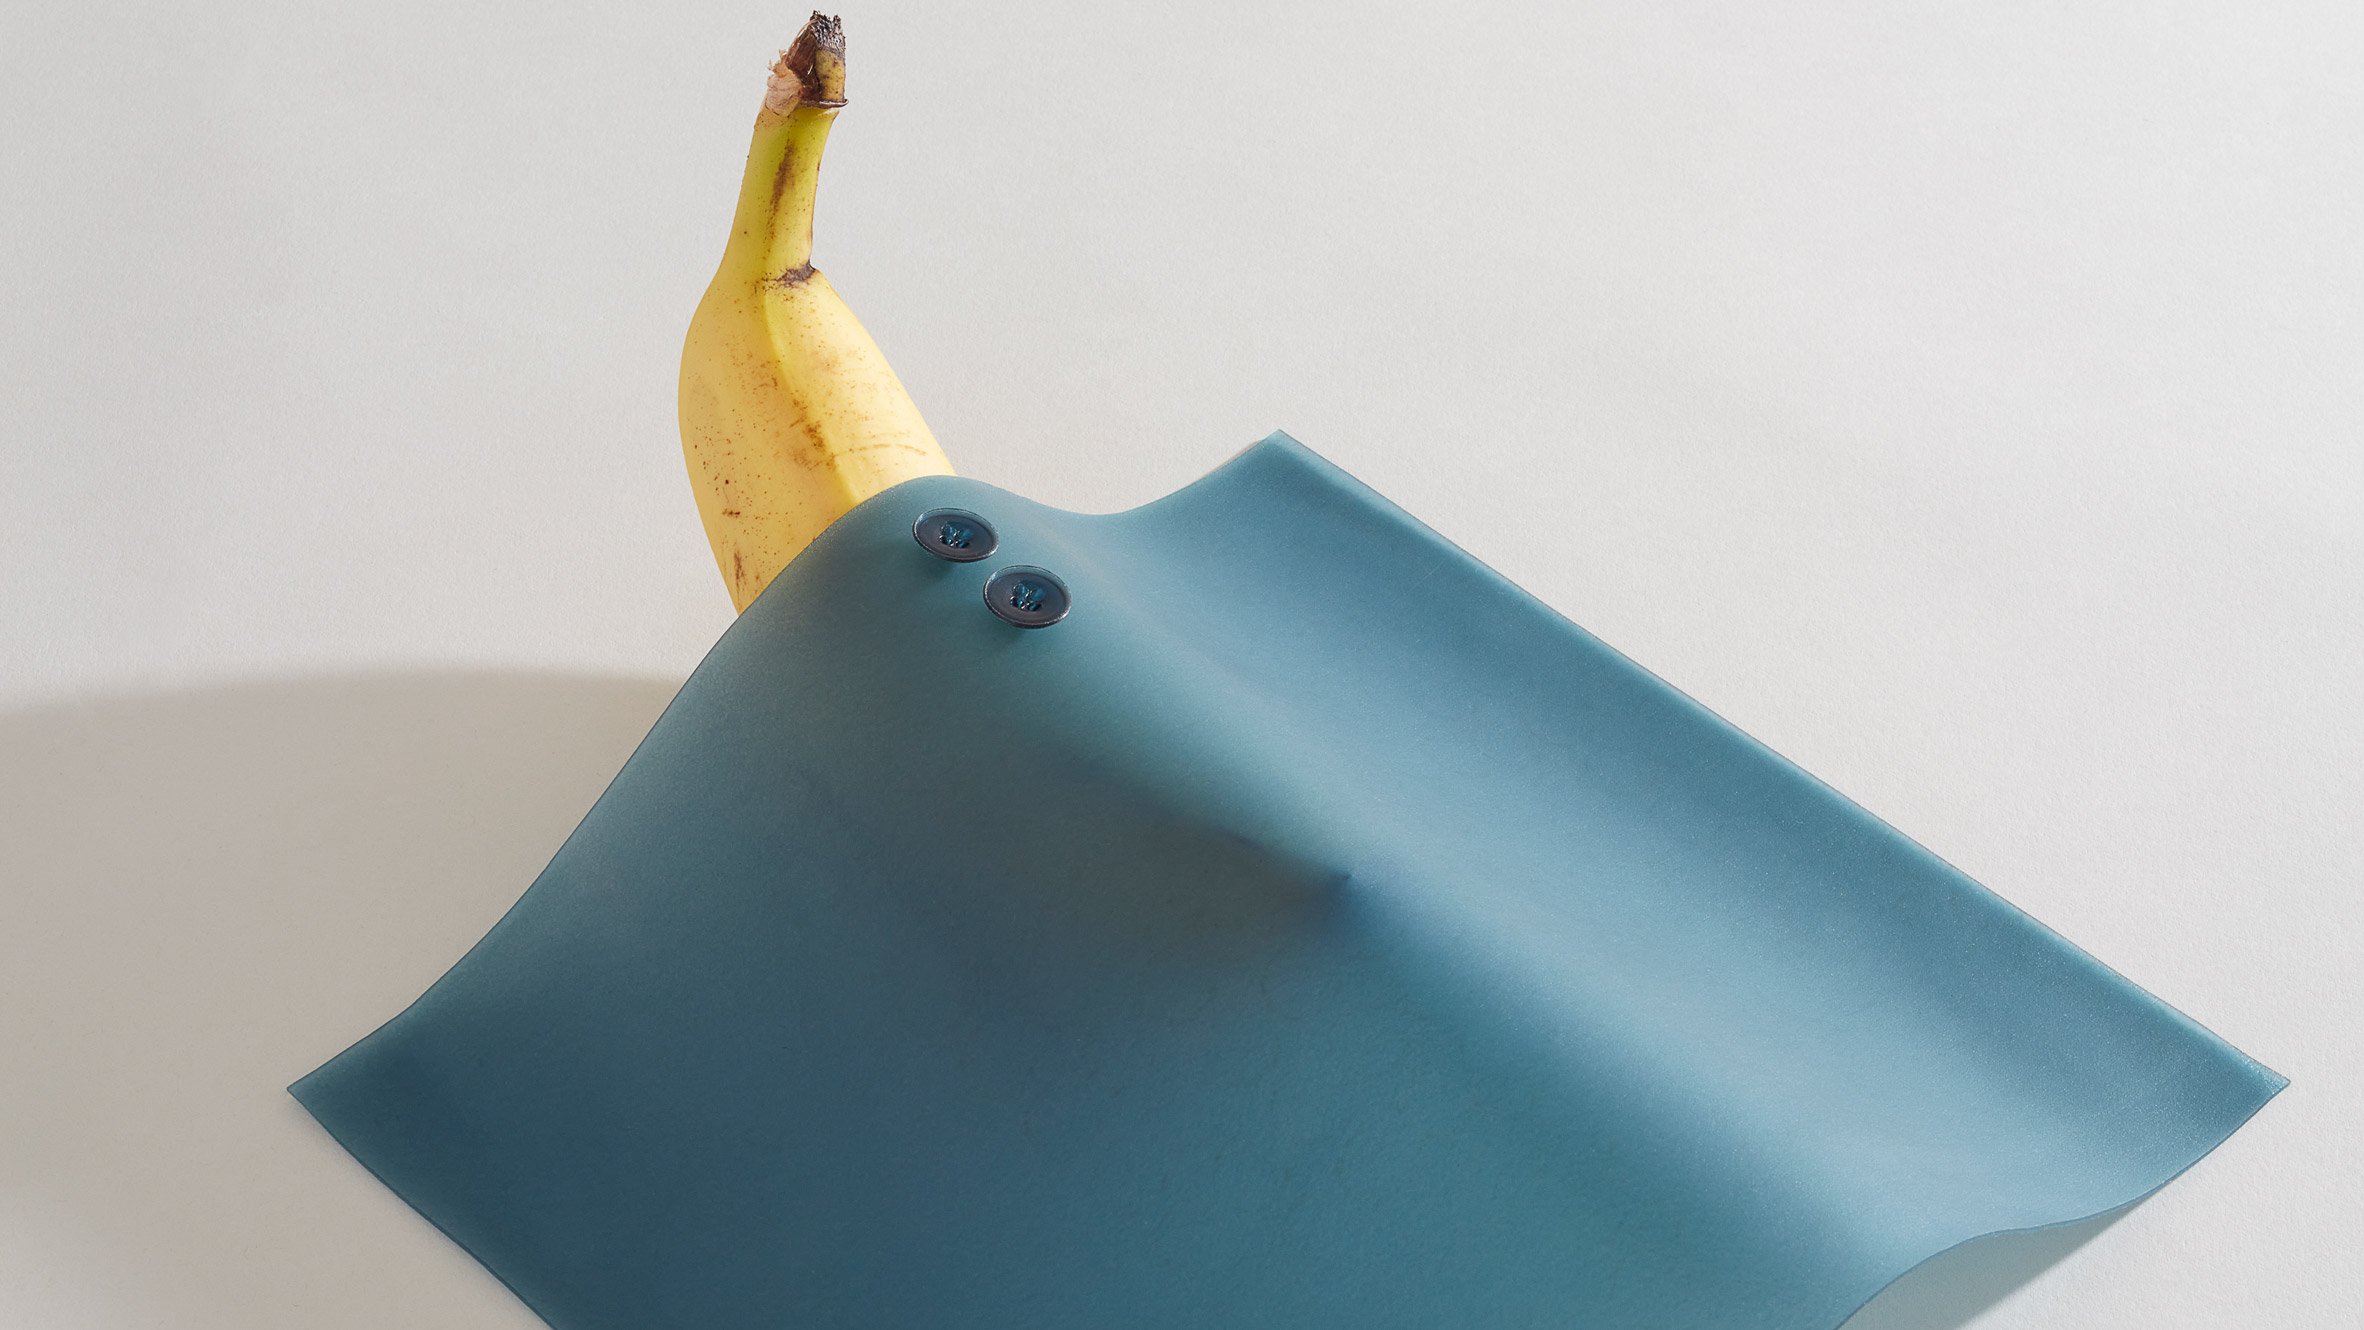 A banana and a blue sheet of Peelsphere